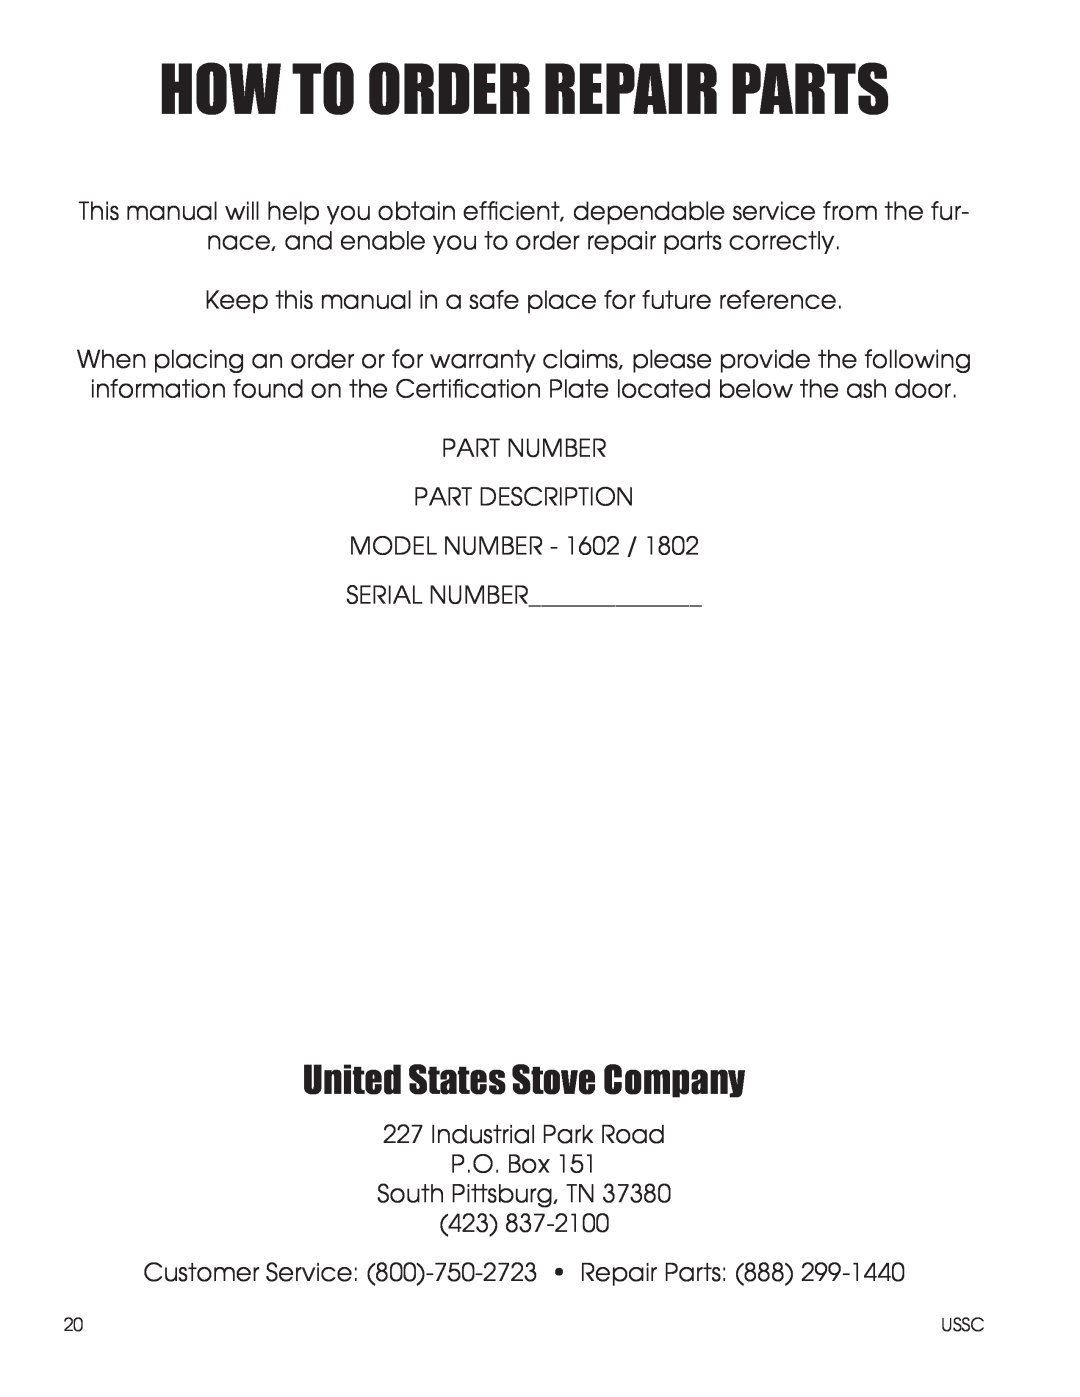 United States Stove 1802G, 1602G installation instructions How To Order Repair Parts, United States Stove Company 